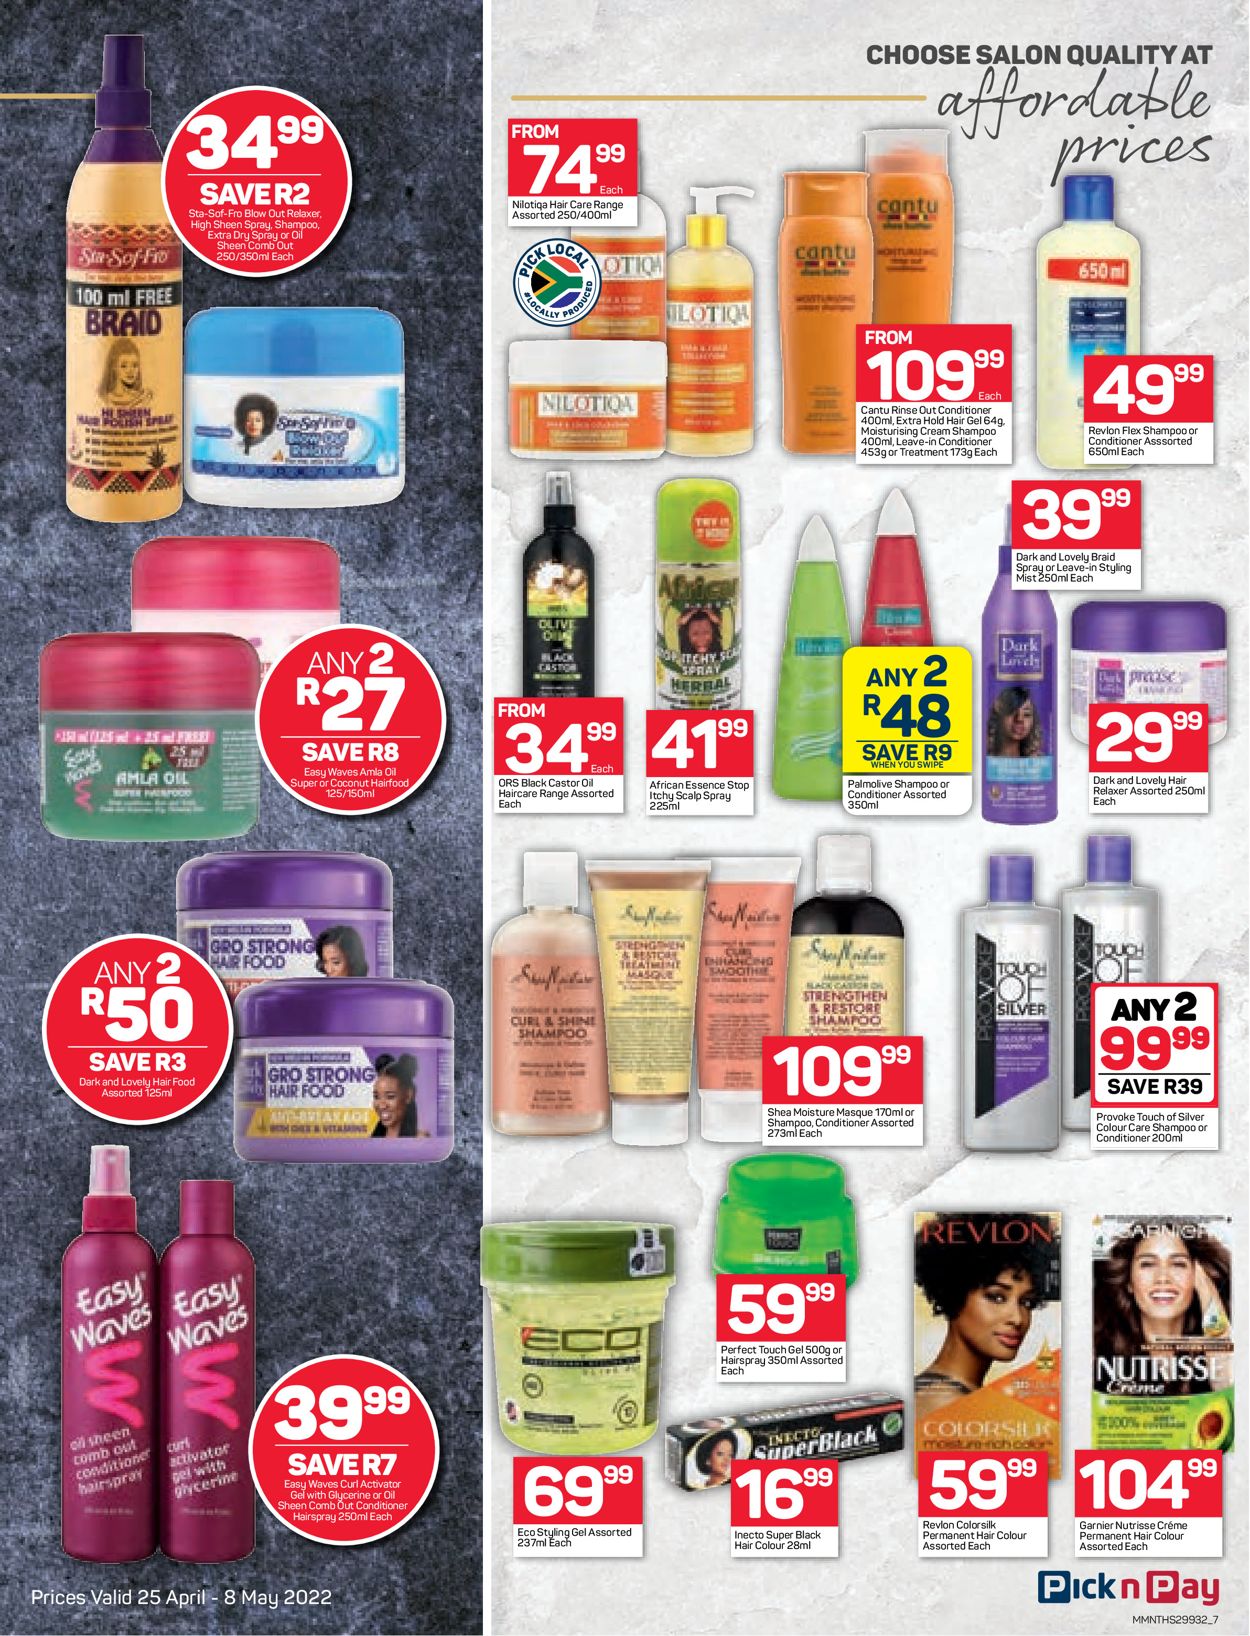 Pick n Pay Catalogue - 2022/04/25-2022/05/08 (Page 7)